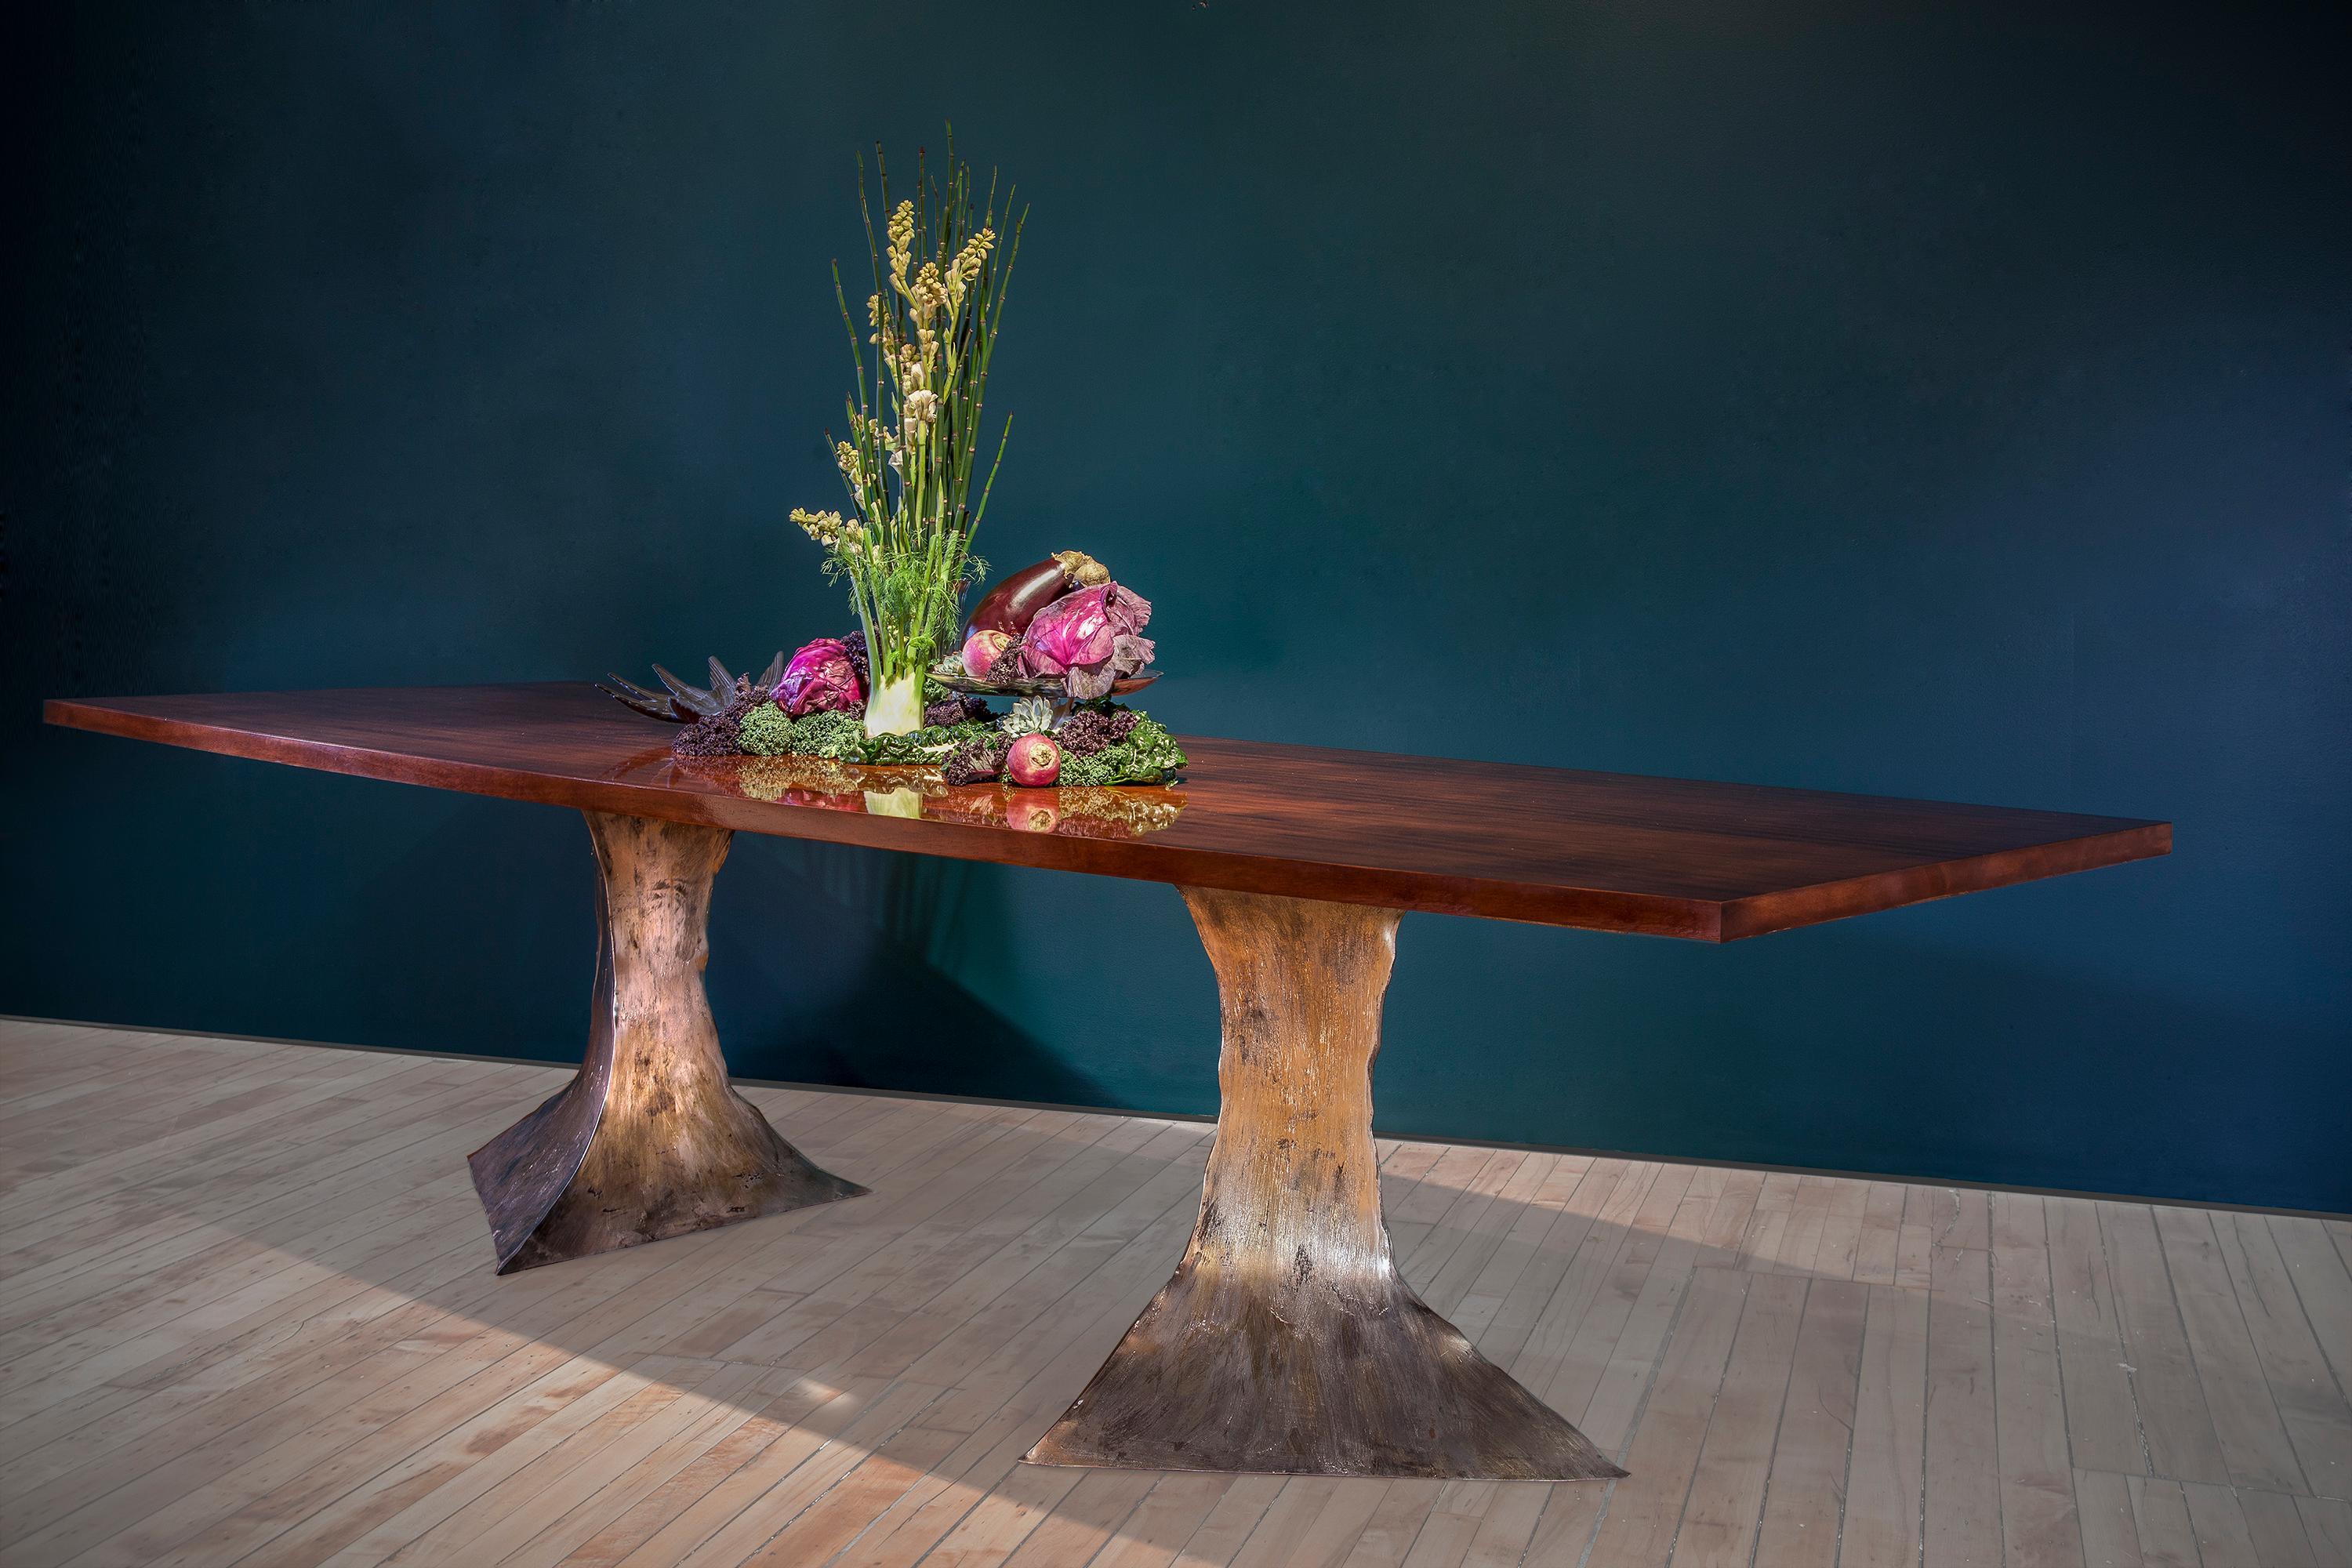 Placid dining table by Gentner Design
Dimensions: D 304 x W 116 x H 76 cm
Materials: walnut, pewter

Gentner Design
Rooted in a language of sculpture, character defining details, and world renowned craftsmanship, the work is found at the